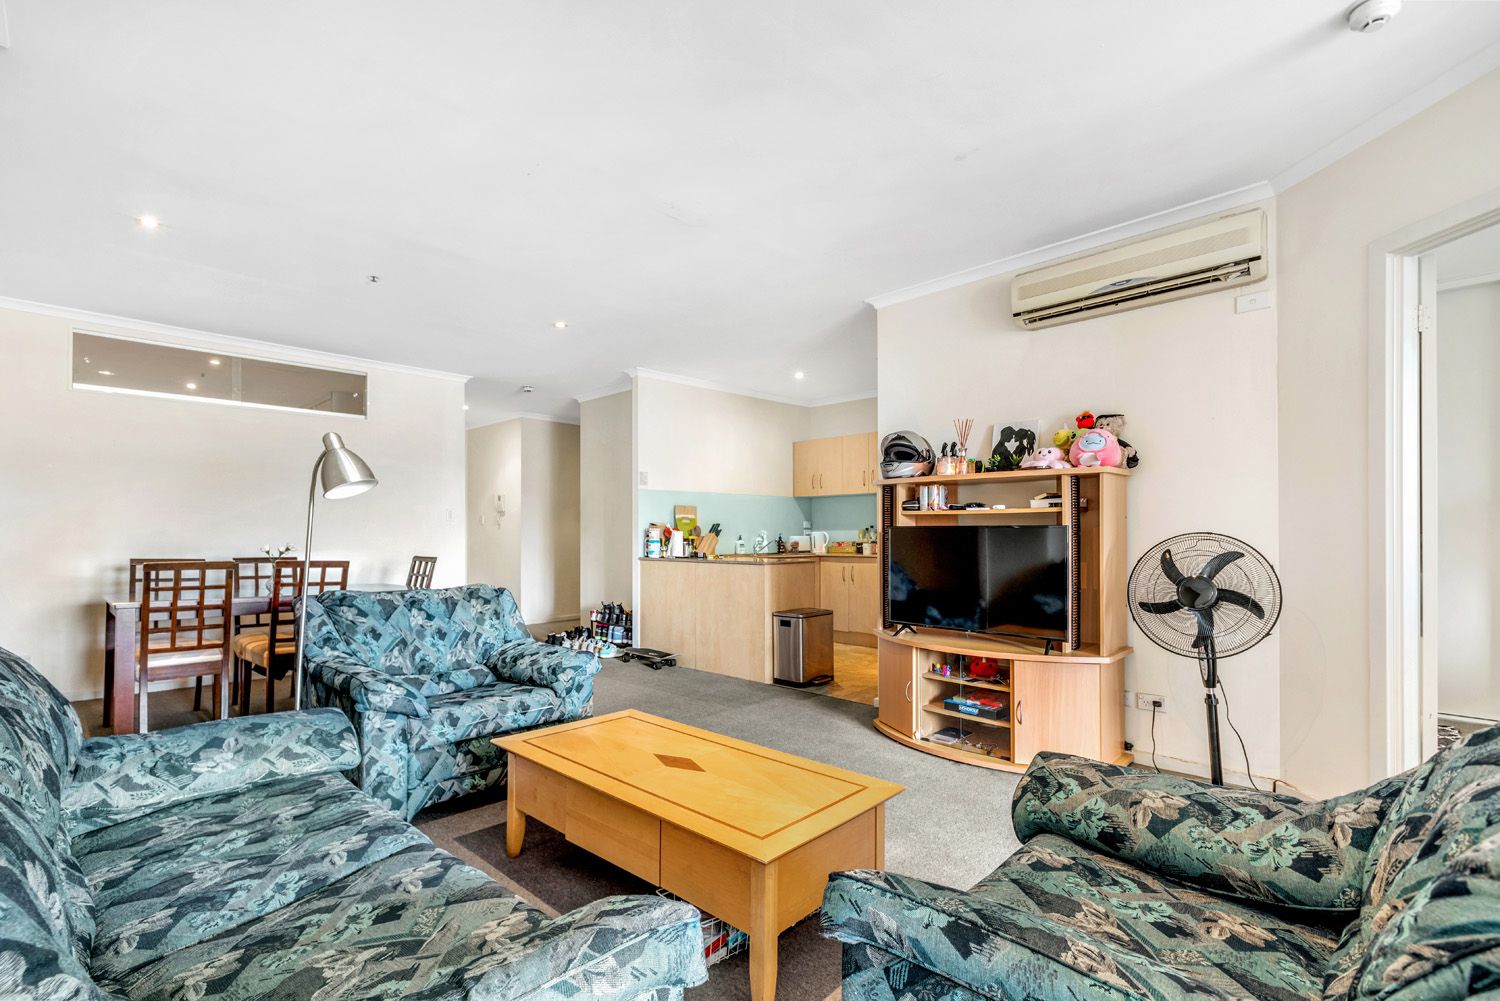 194/65 King William Street (Tower Apartments), Adelaide SA 5000, Image 1